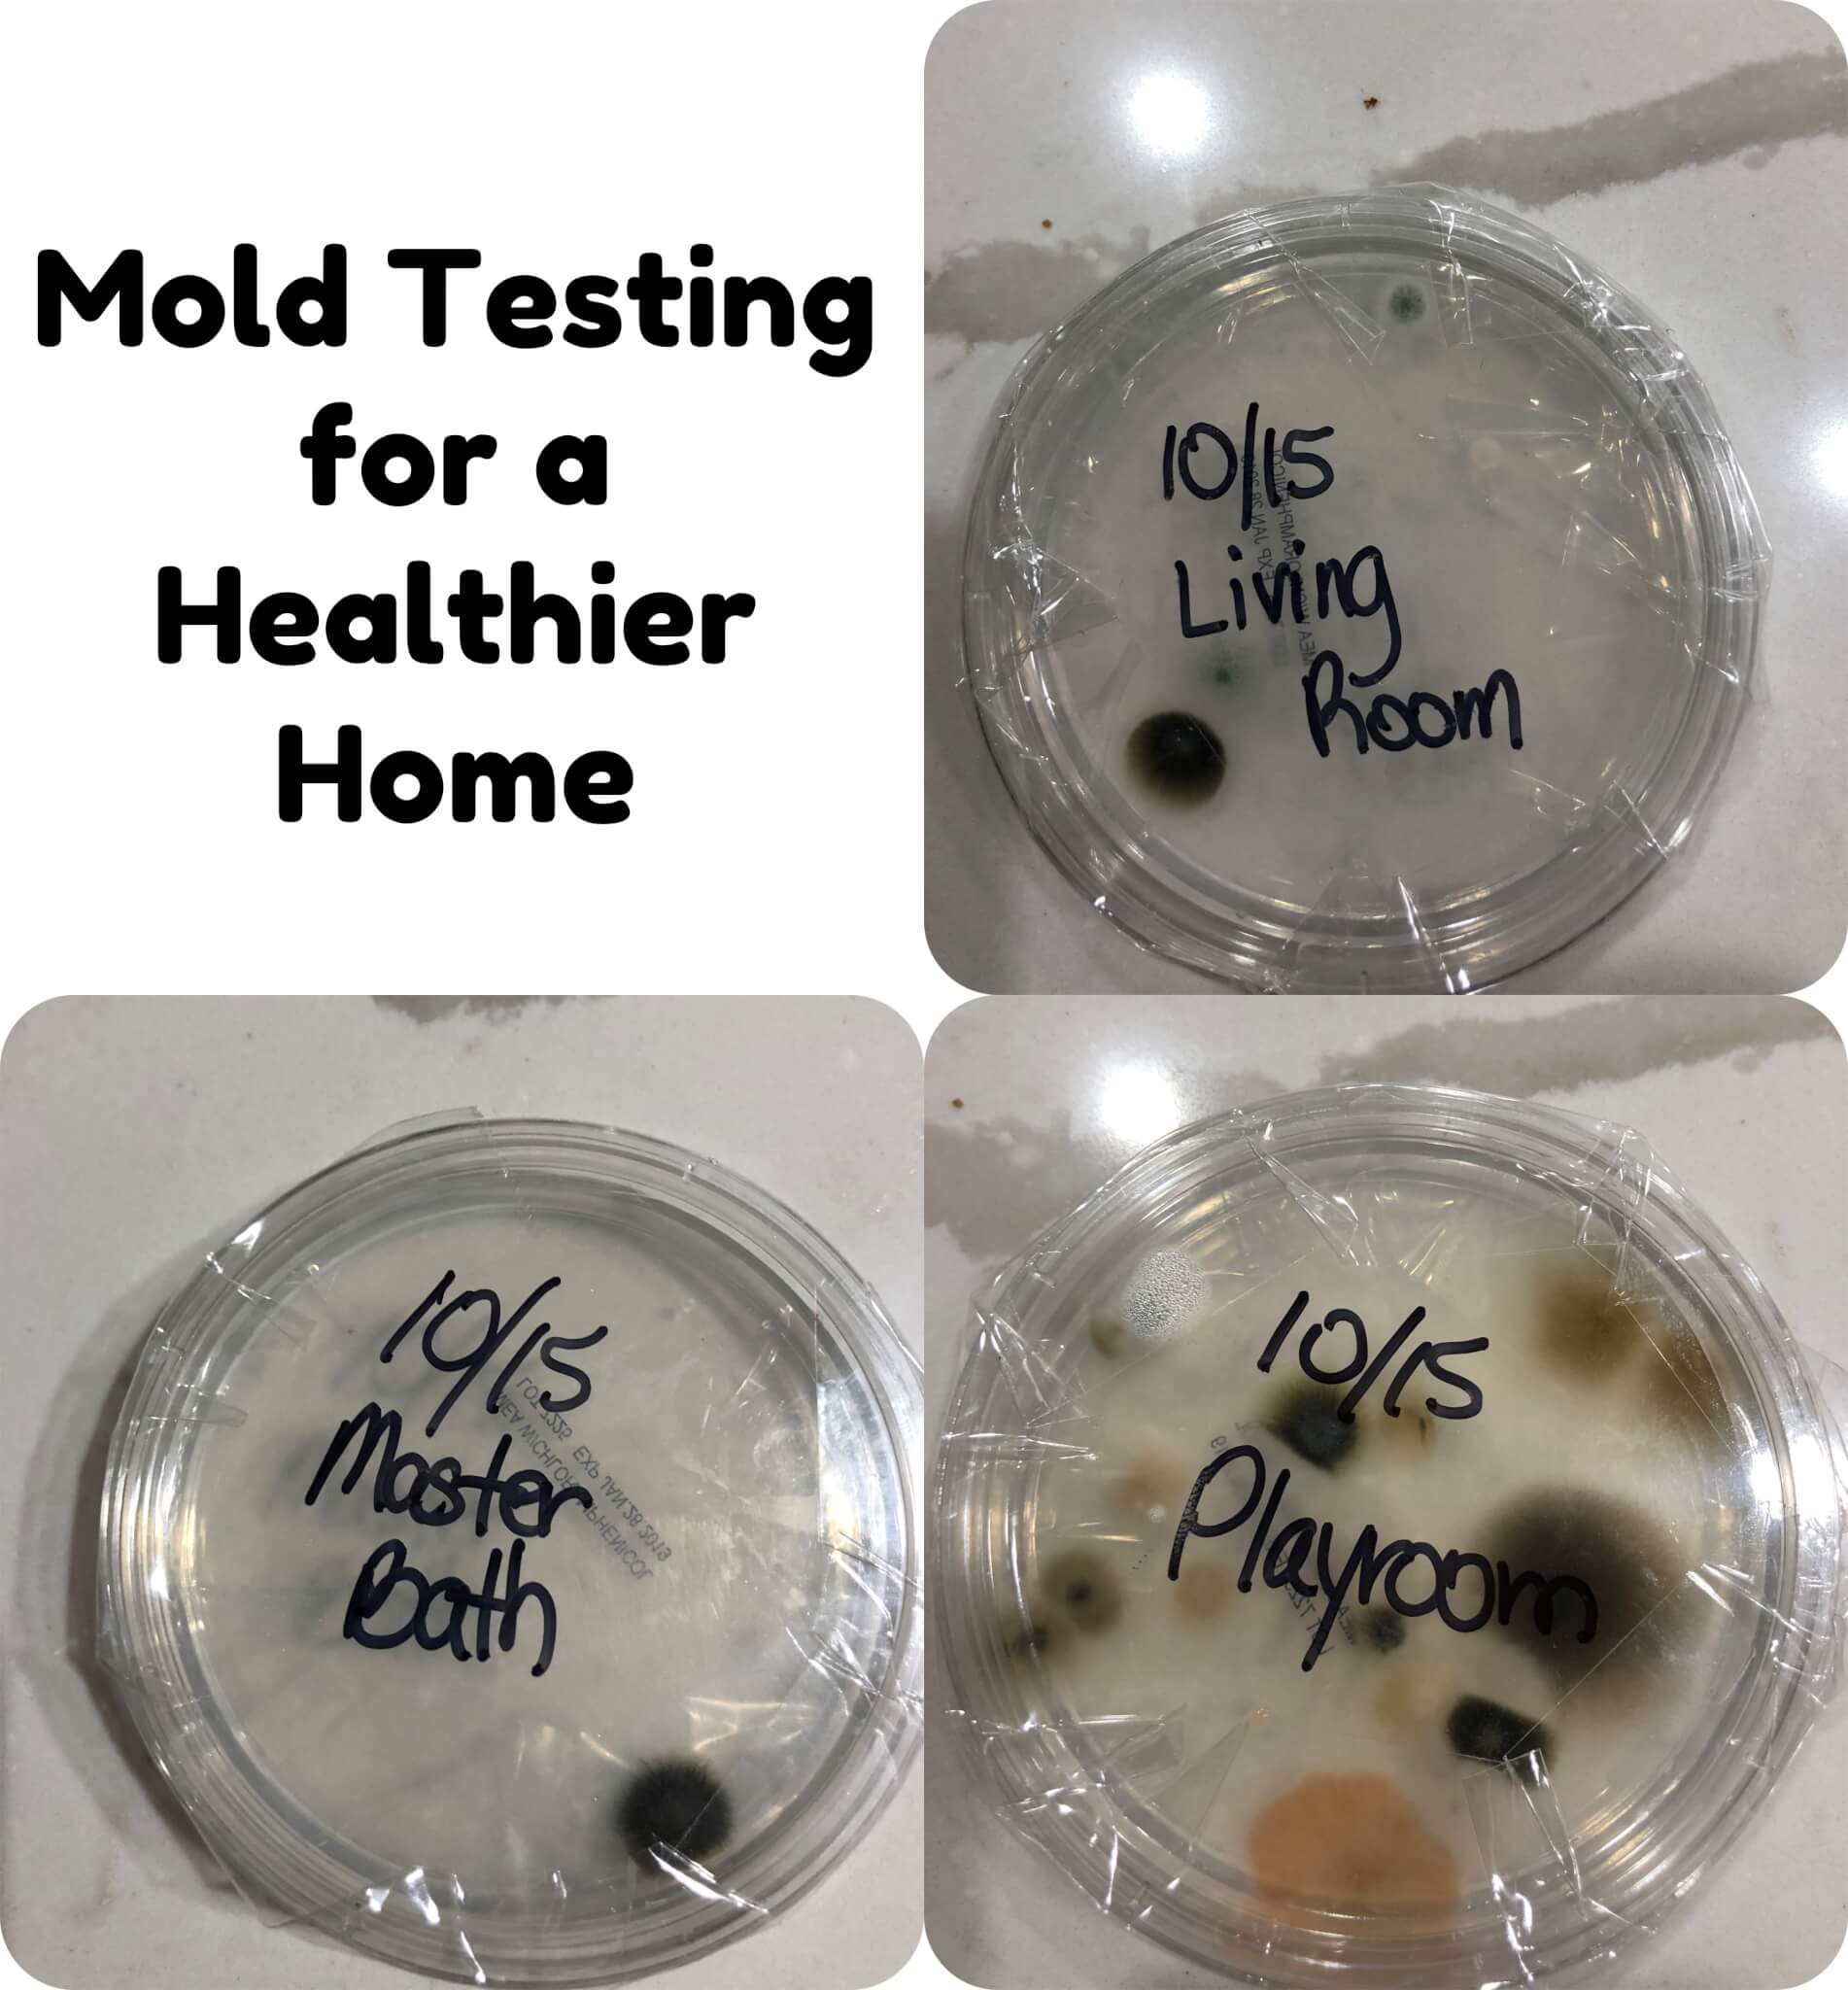 Mold Testing: KNOWING is Half the Battle